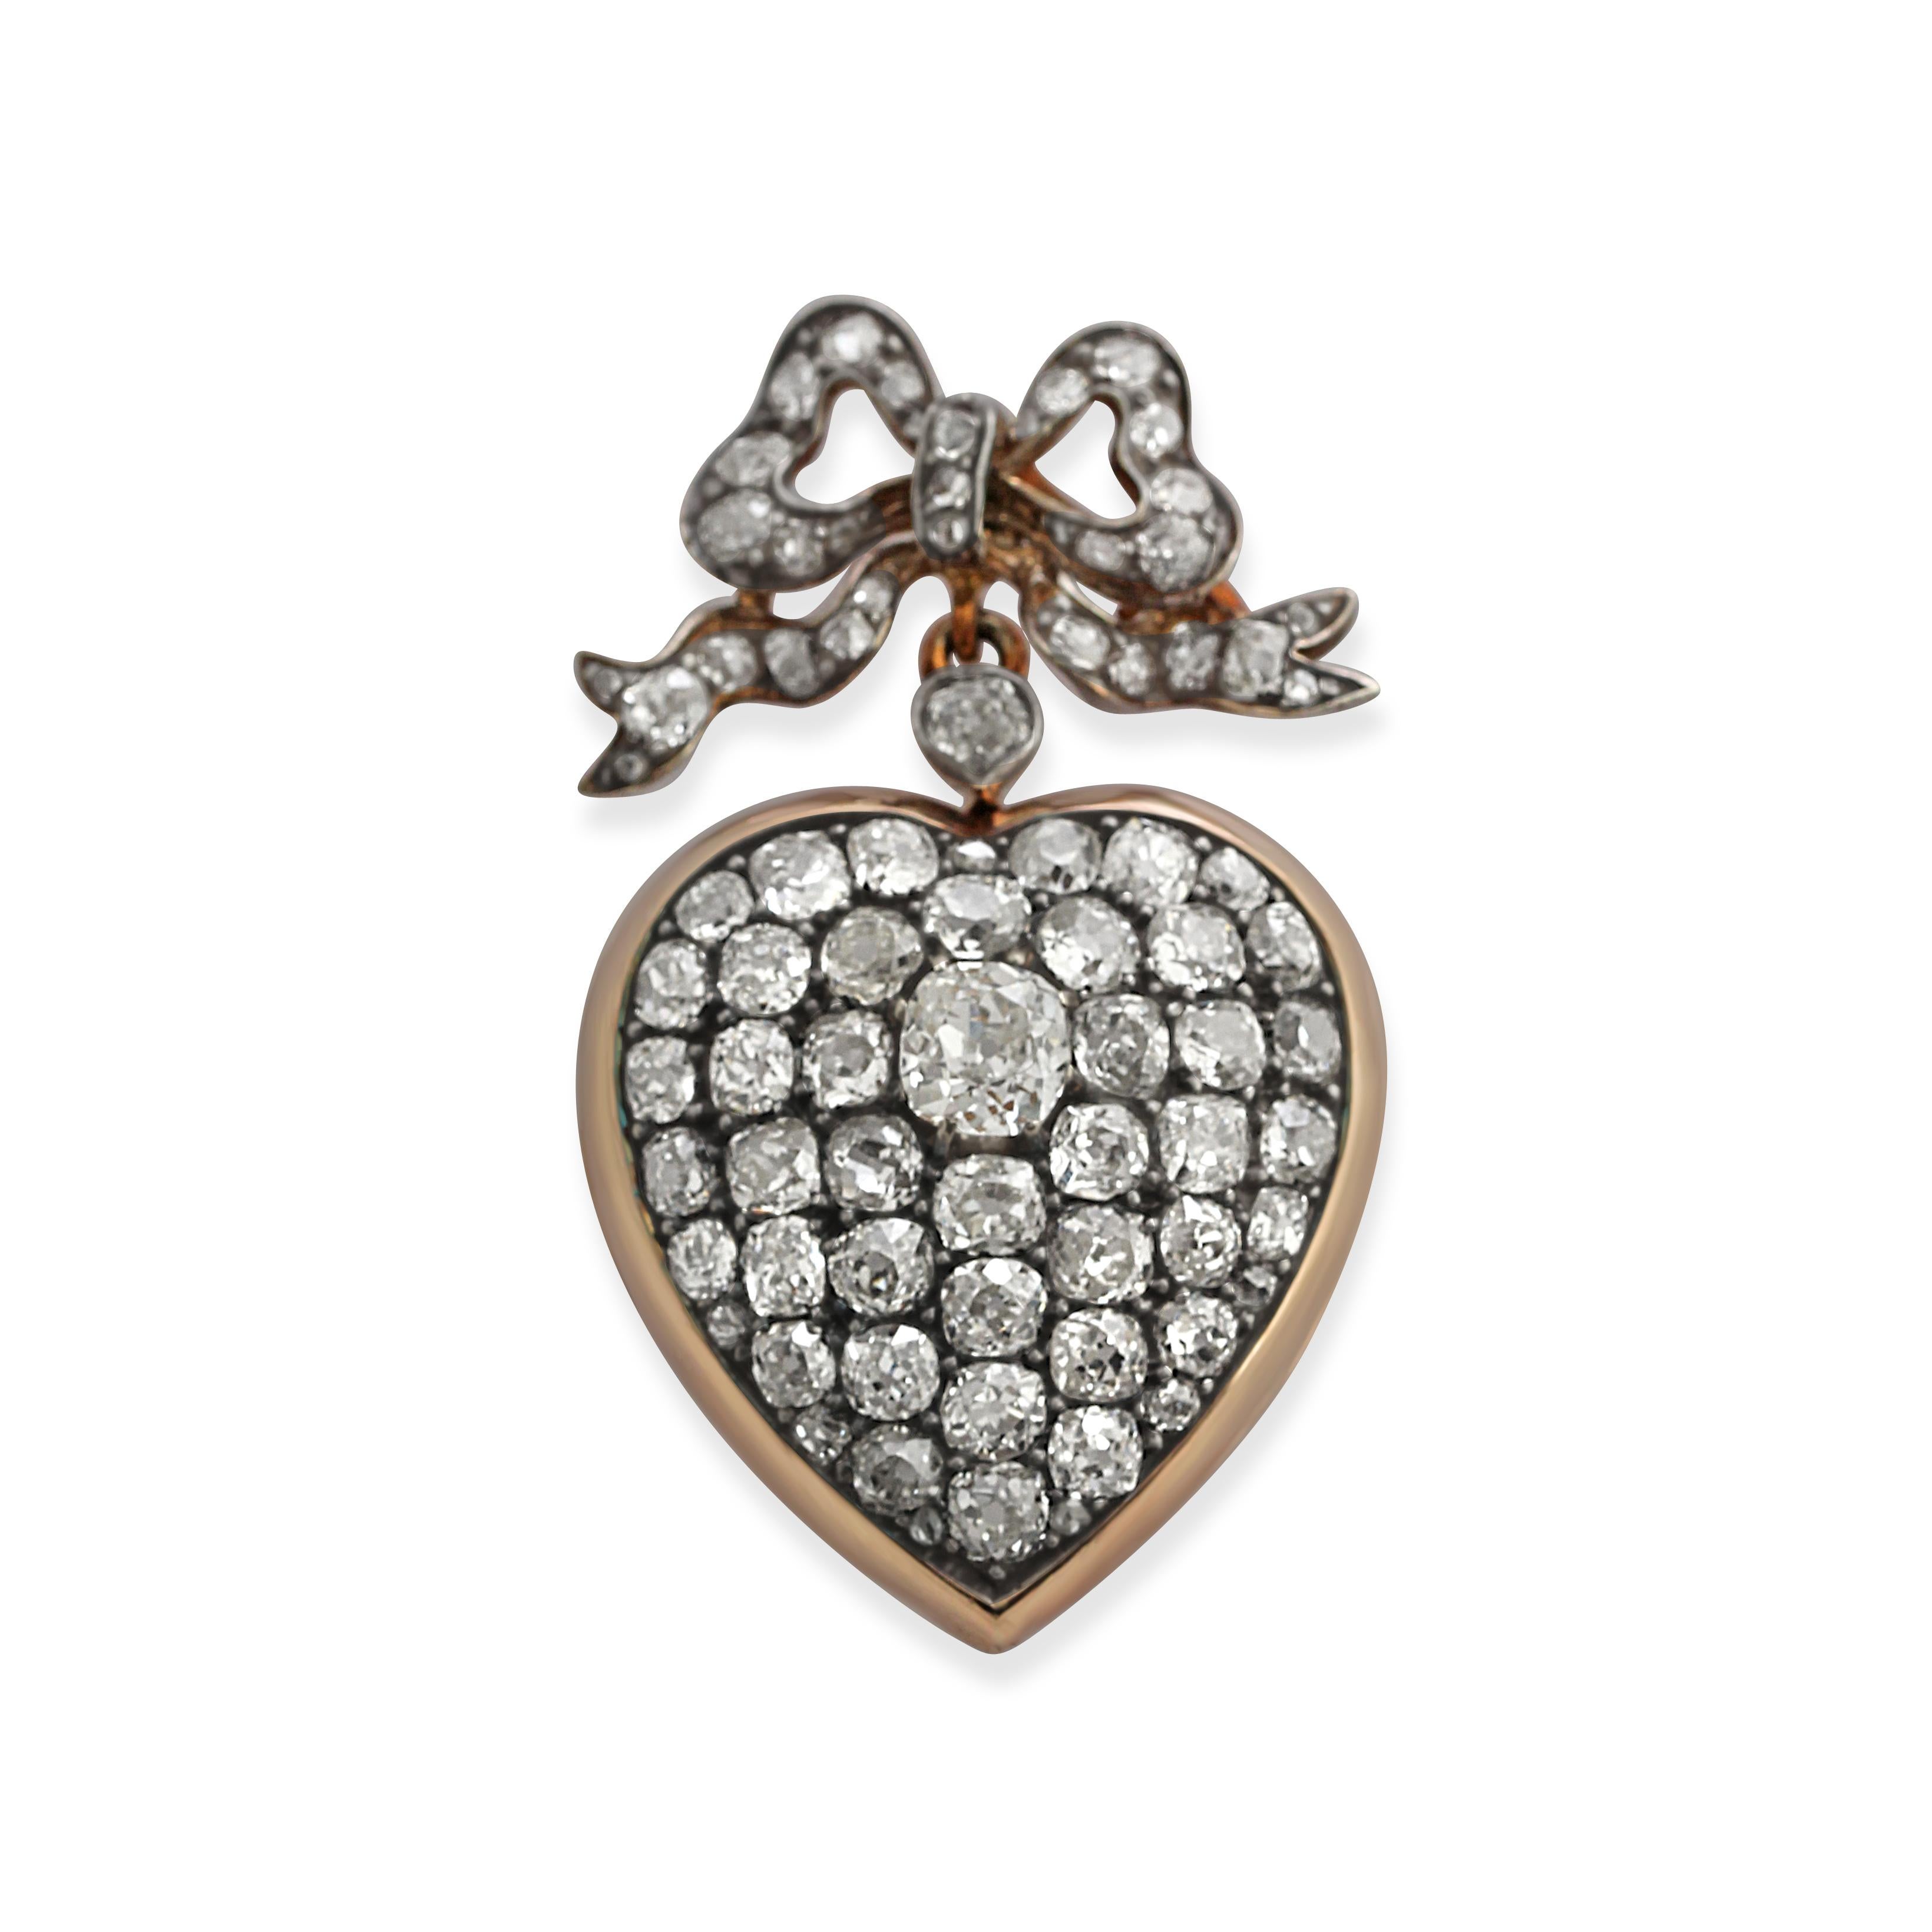 A stunning antique diamond pendant. Crafted from silver mounted on top of gold and set with old and rose-cut diamonds in an elegant heart shape with a bow at the hook. Length = 4.8cm. Weight = 19.30gr.